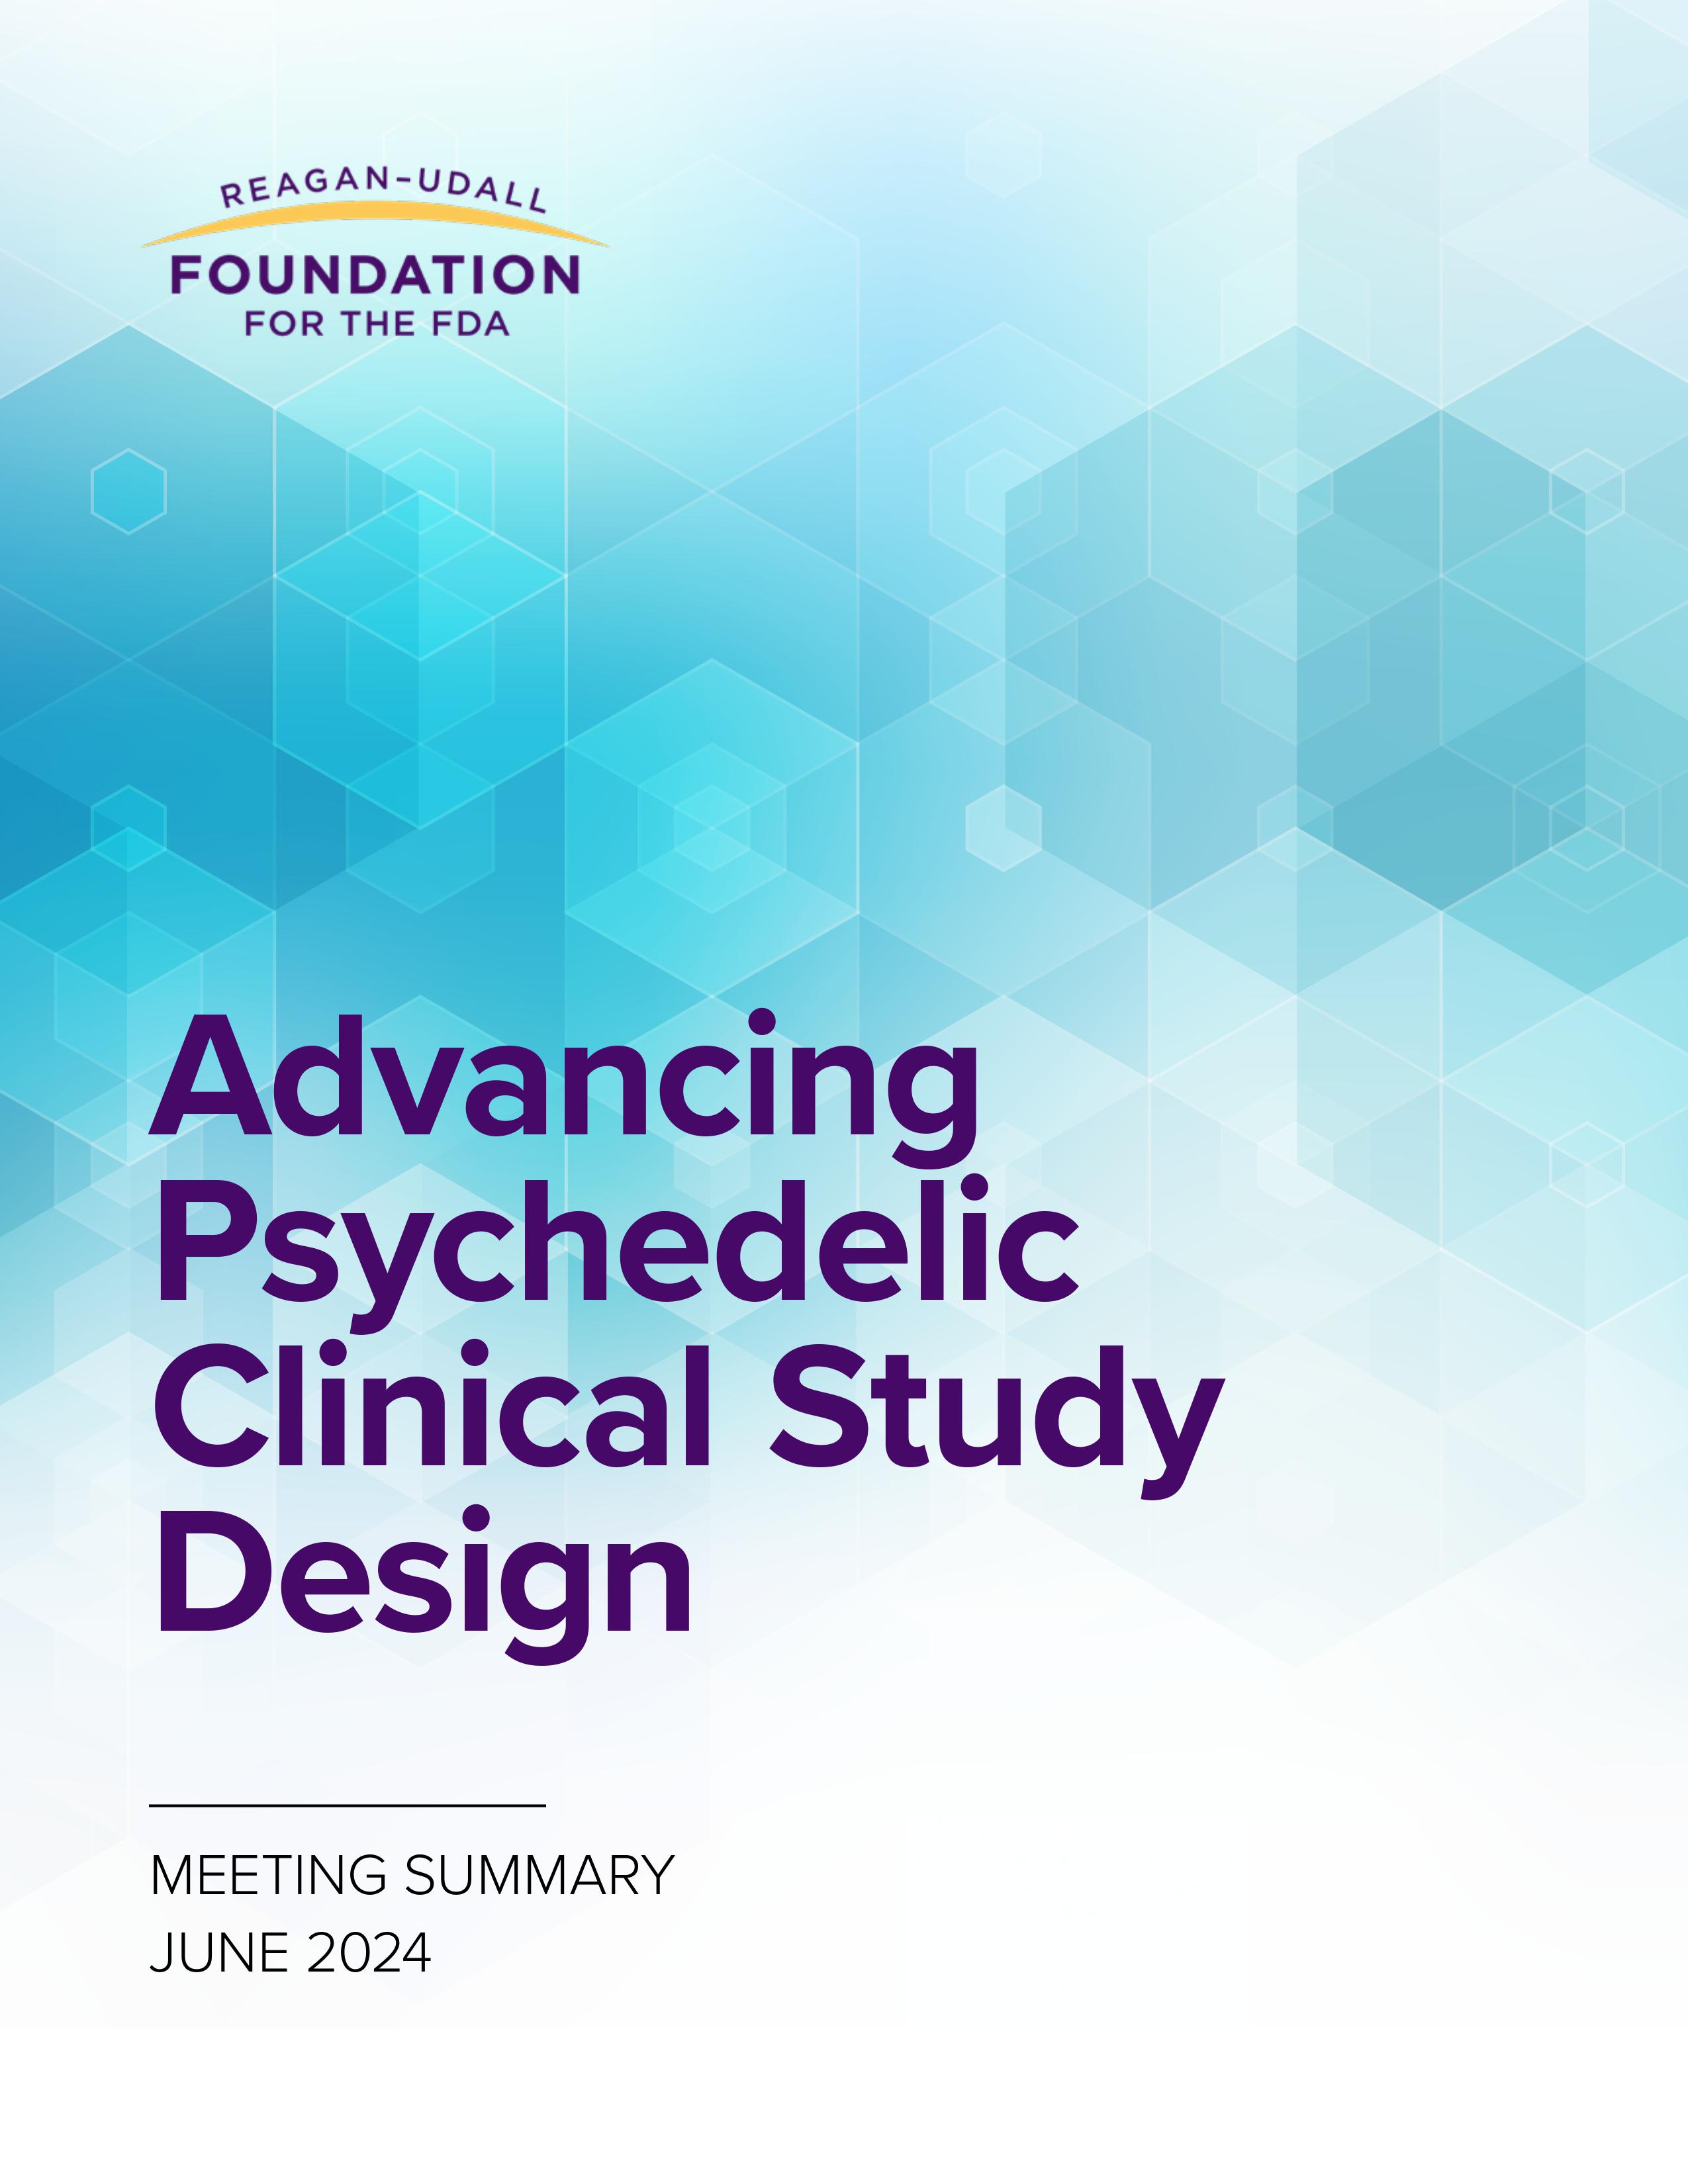 Advancing Psychedelic Clinical Study Design